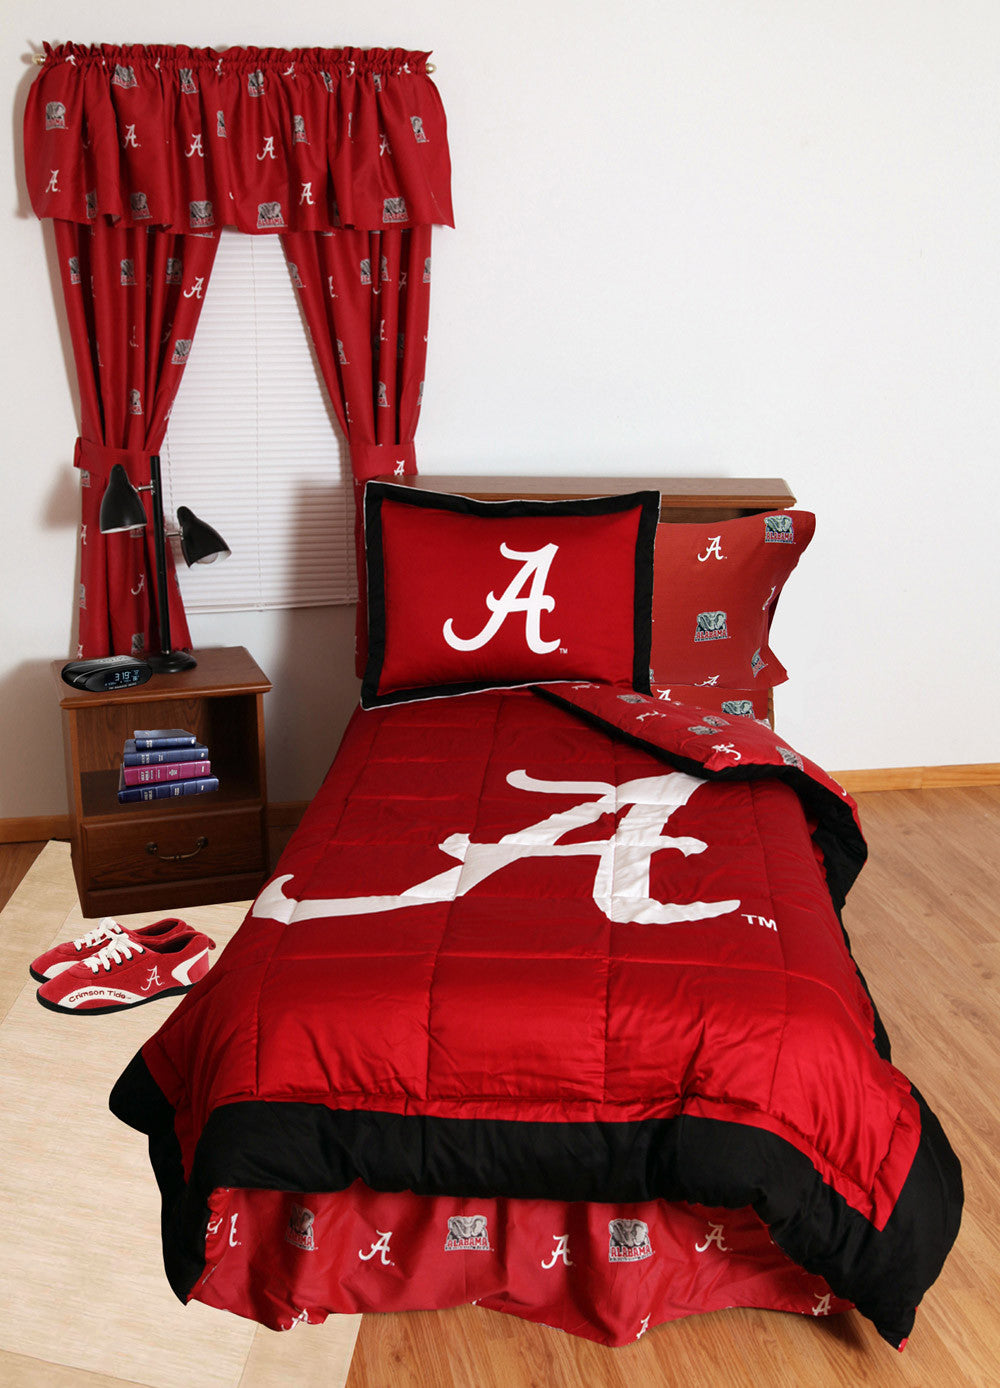 Alabama Bed In A Bag Queen - With Team Colored Sheets - Alabbqu By College Covers